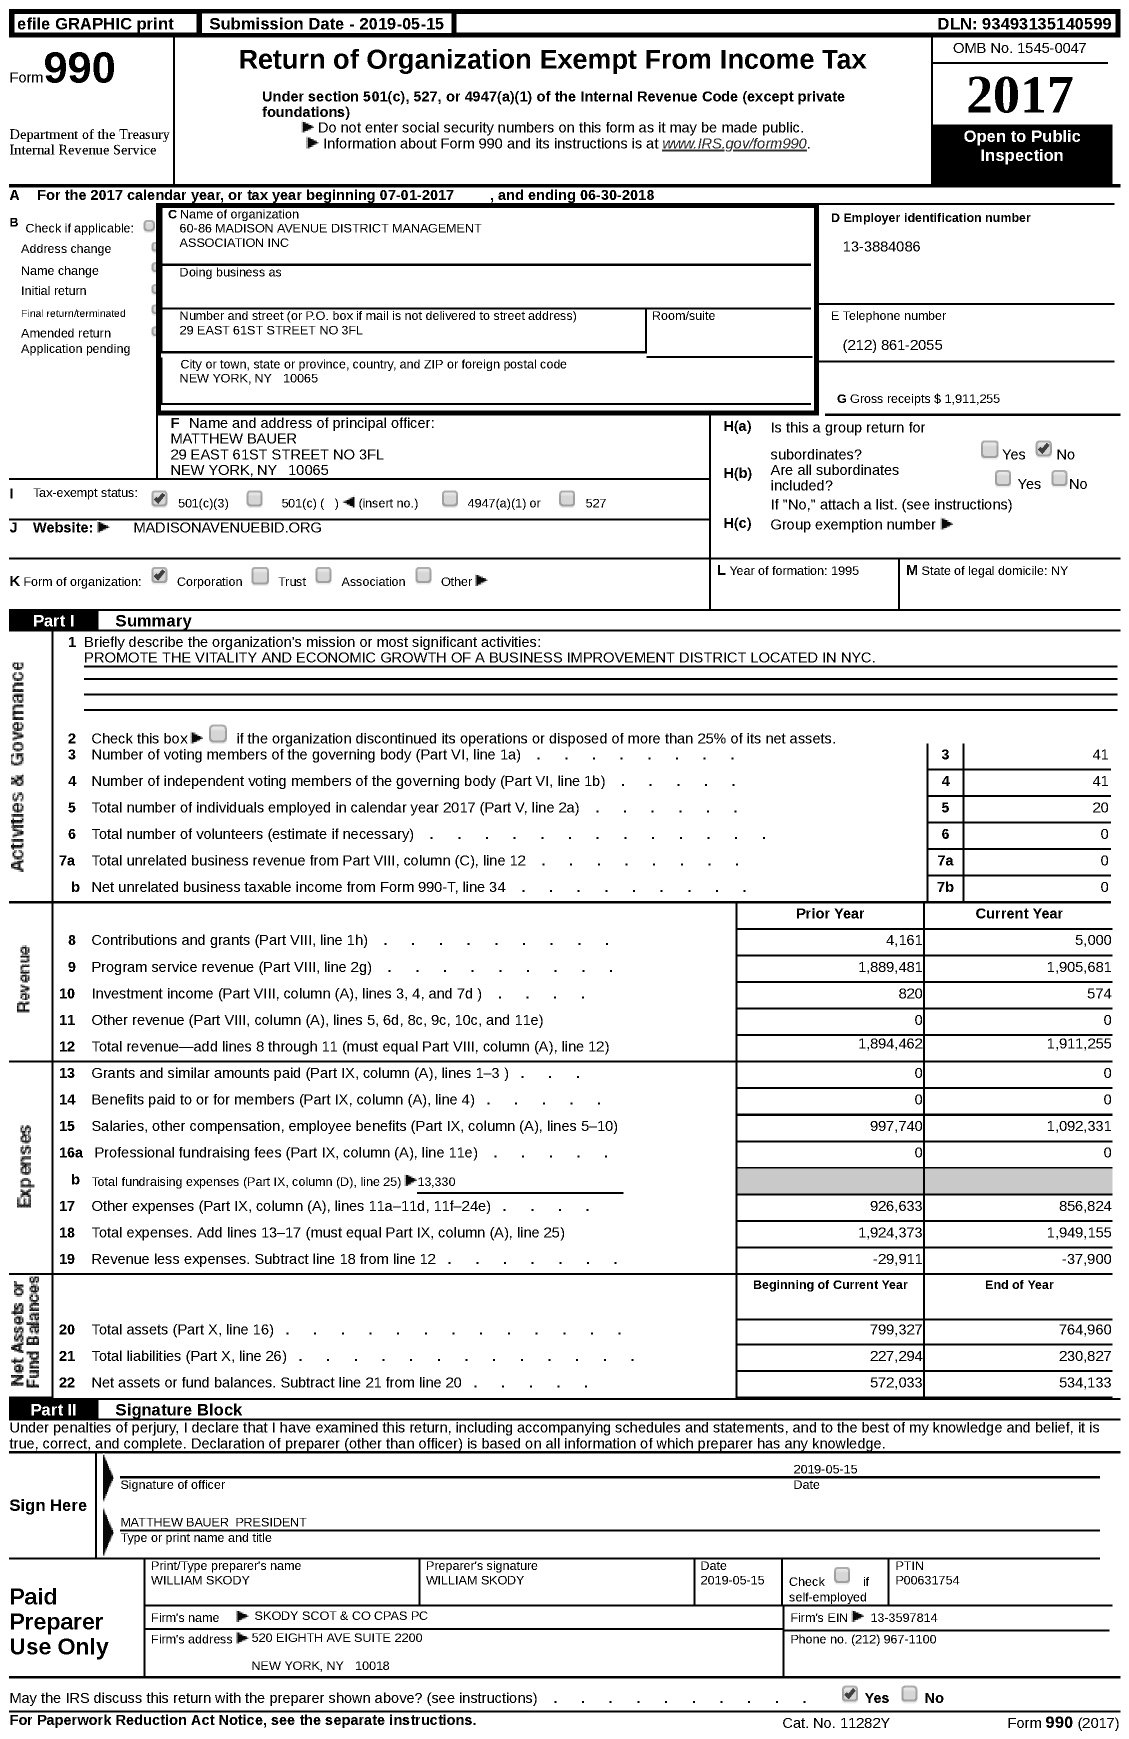 Image of first page of 2017 Form 990 for 60-86 Madison Avenue District Management Association